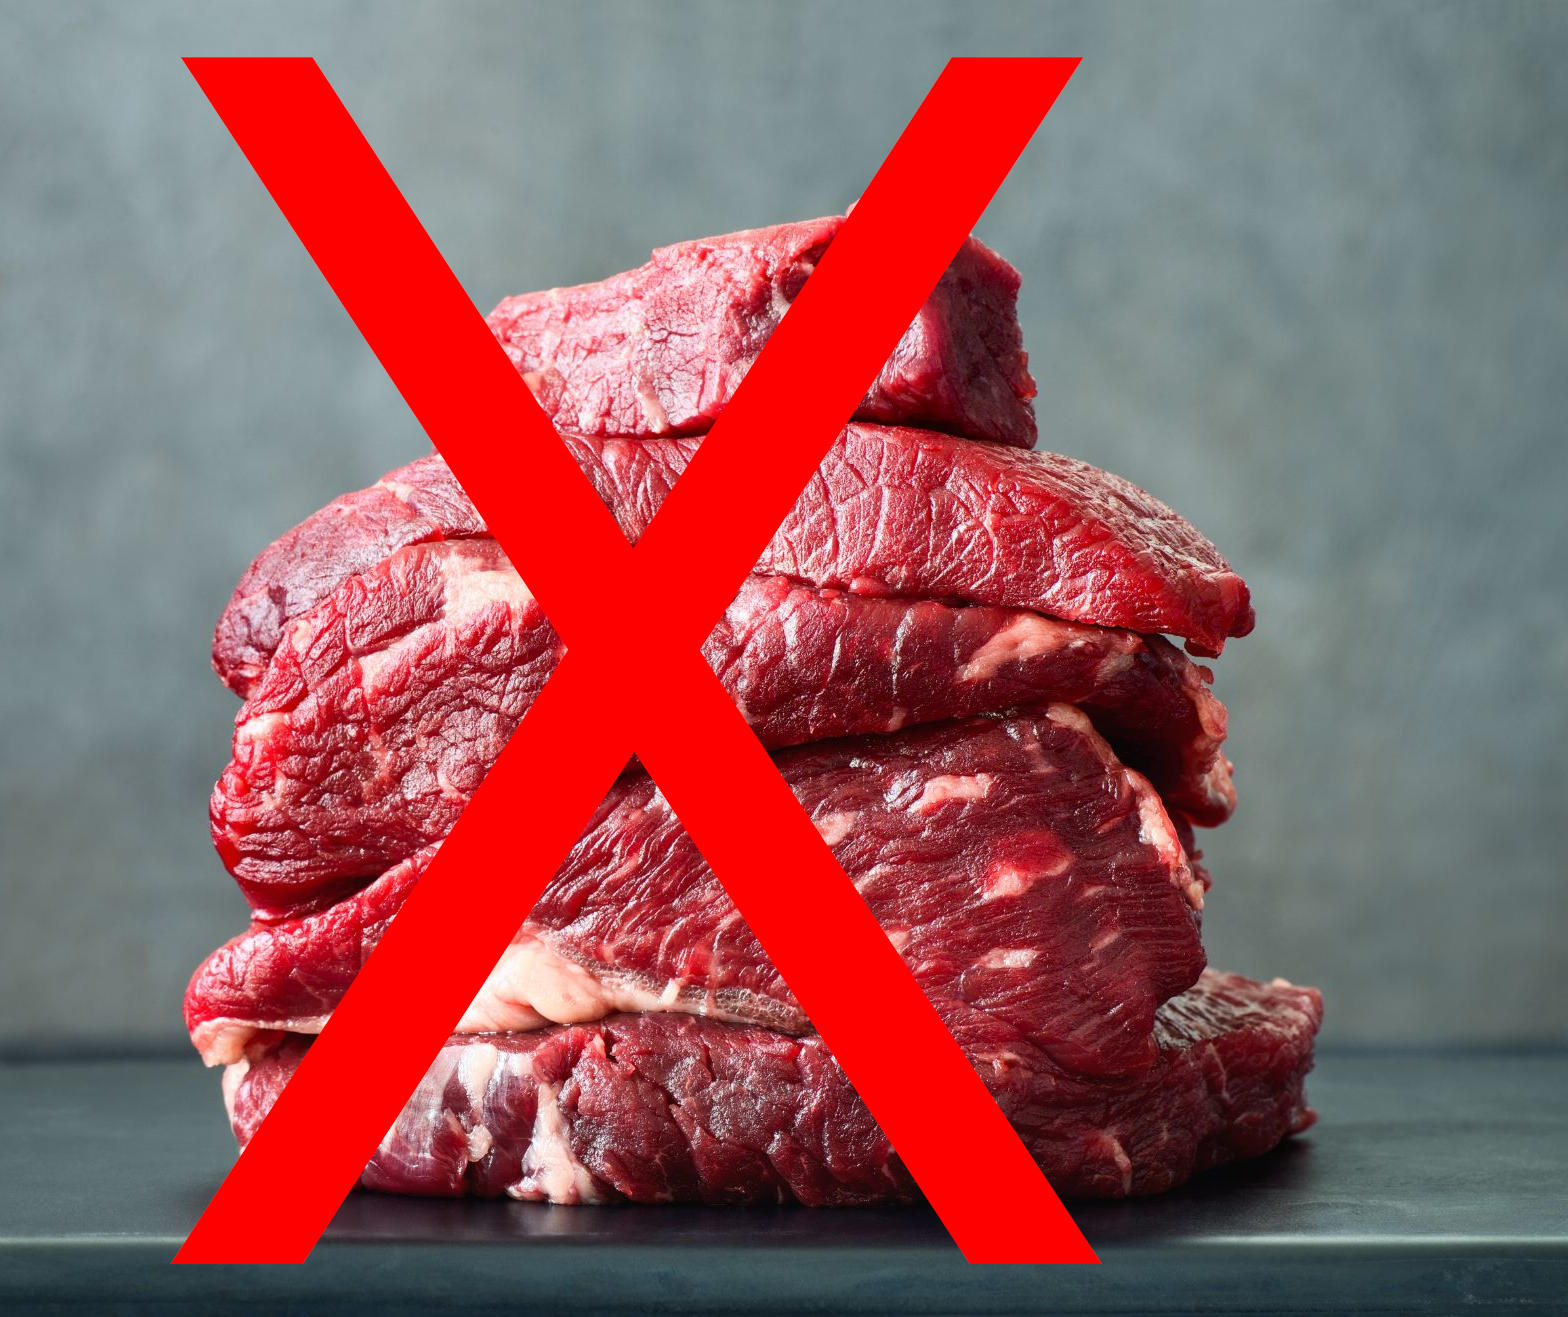 Need To Eat Wholesome and Save the Planet? Scientists Suggest Changing Beef With This